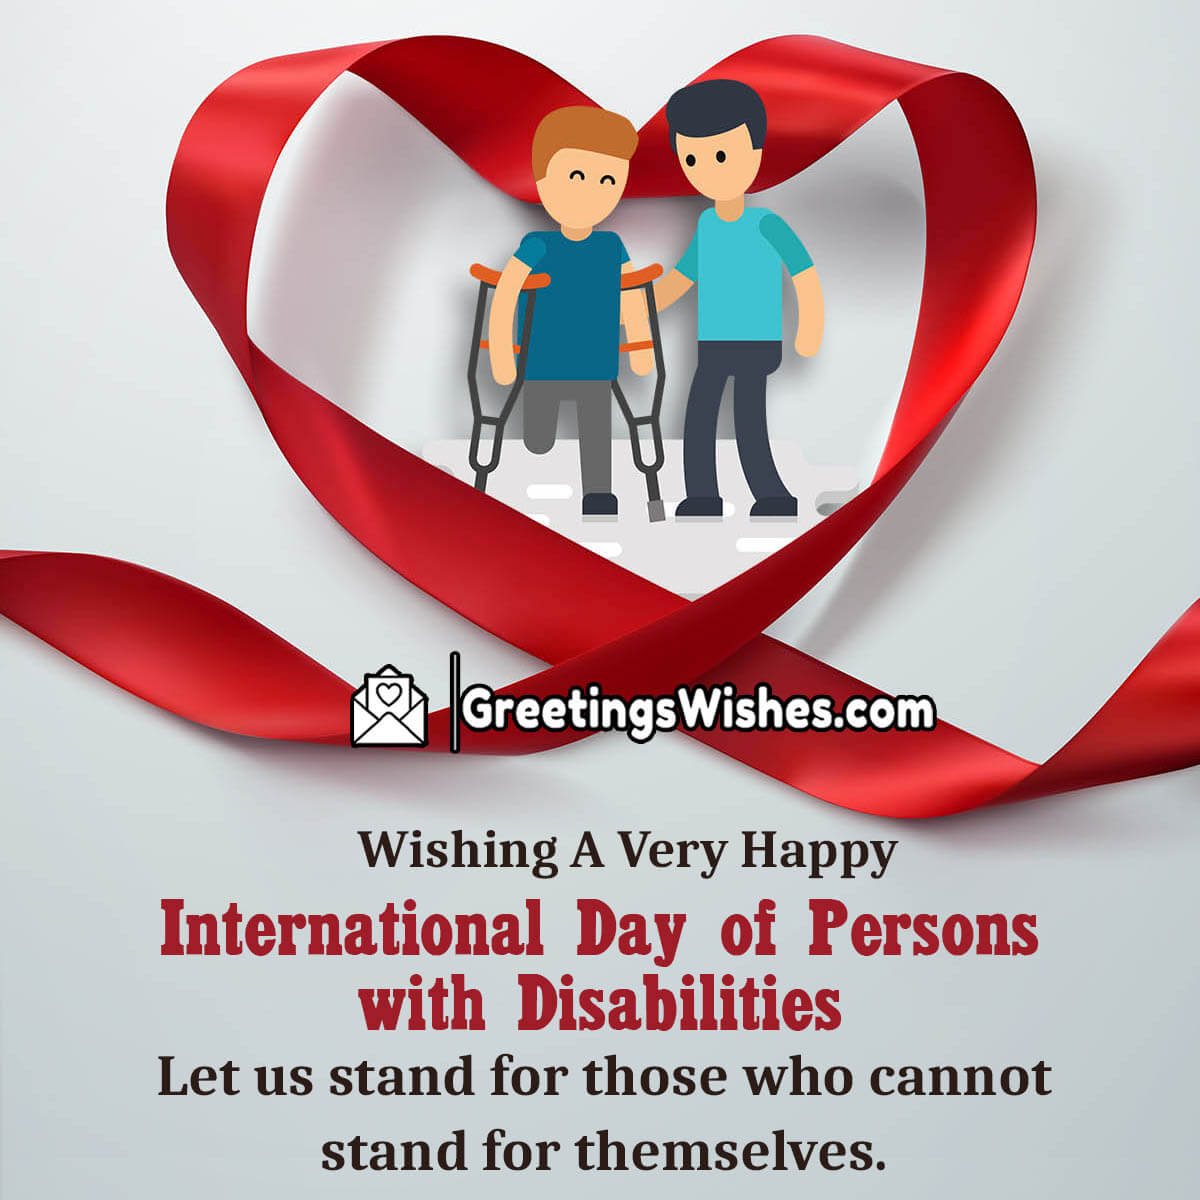 Wishing A Very Happy International Day Of Persons With Disabilities